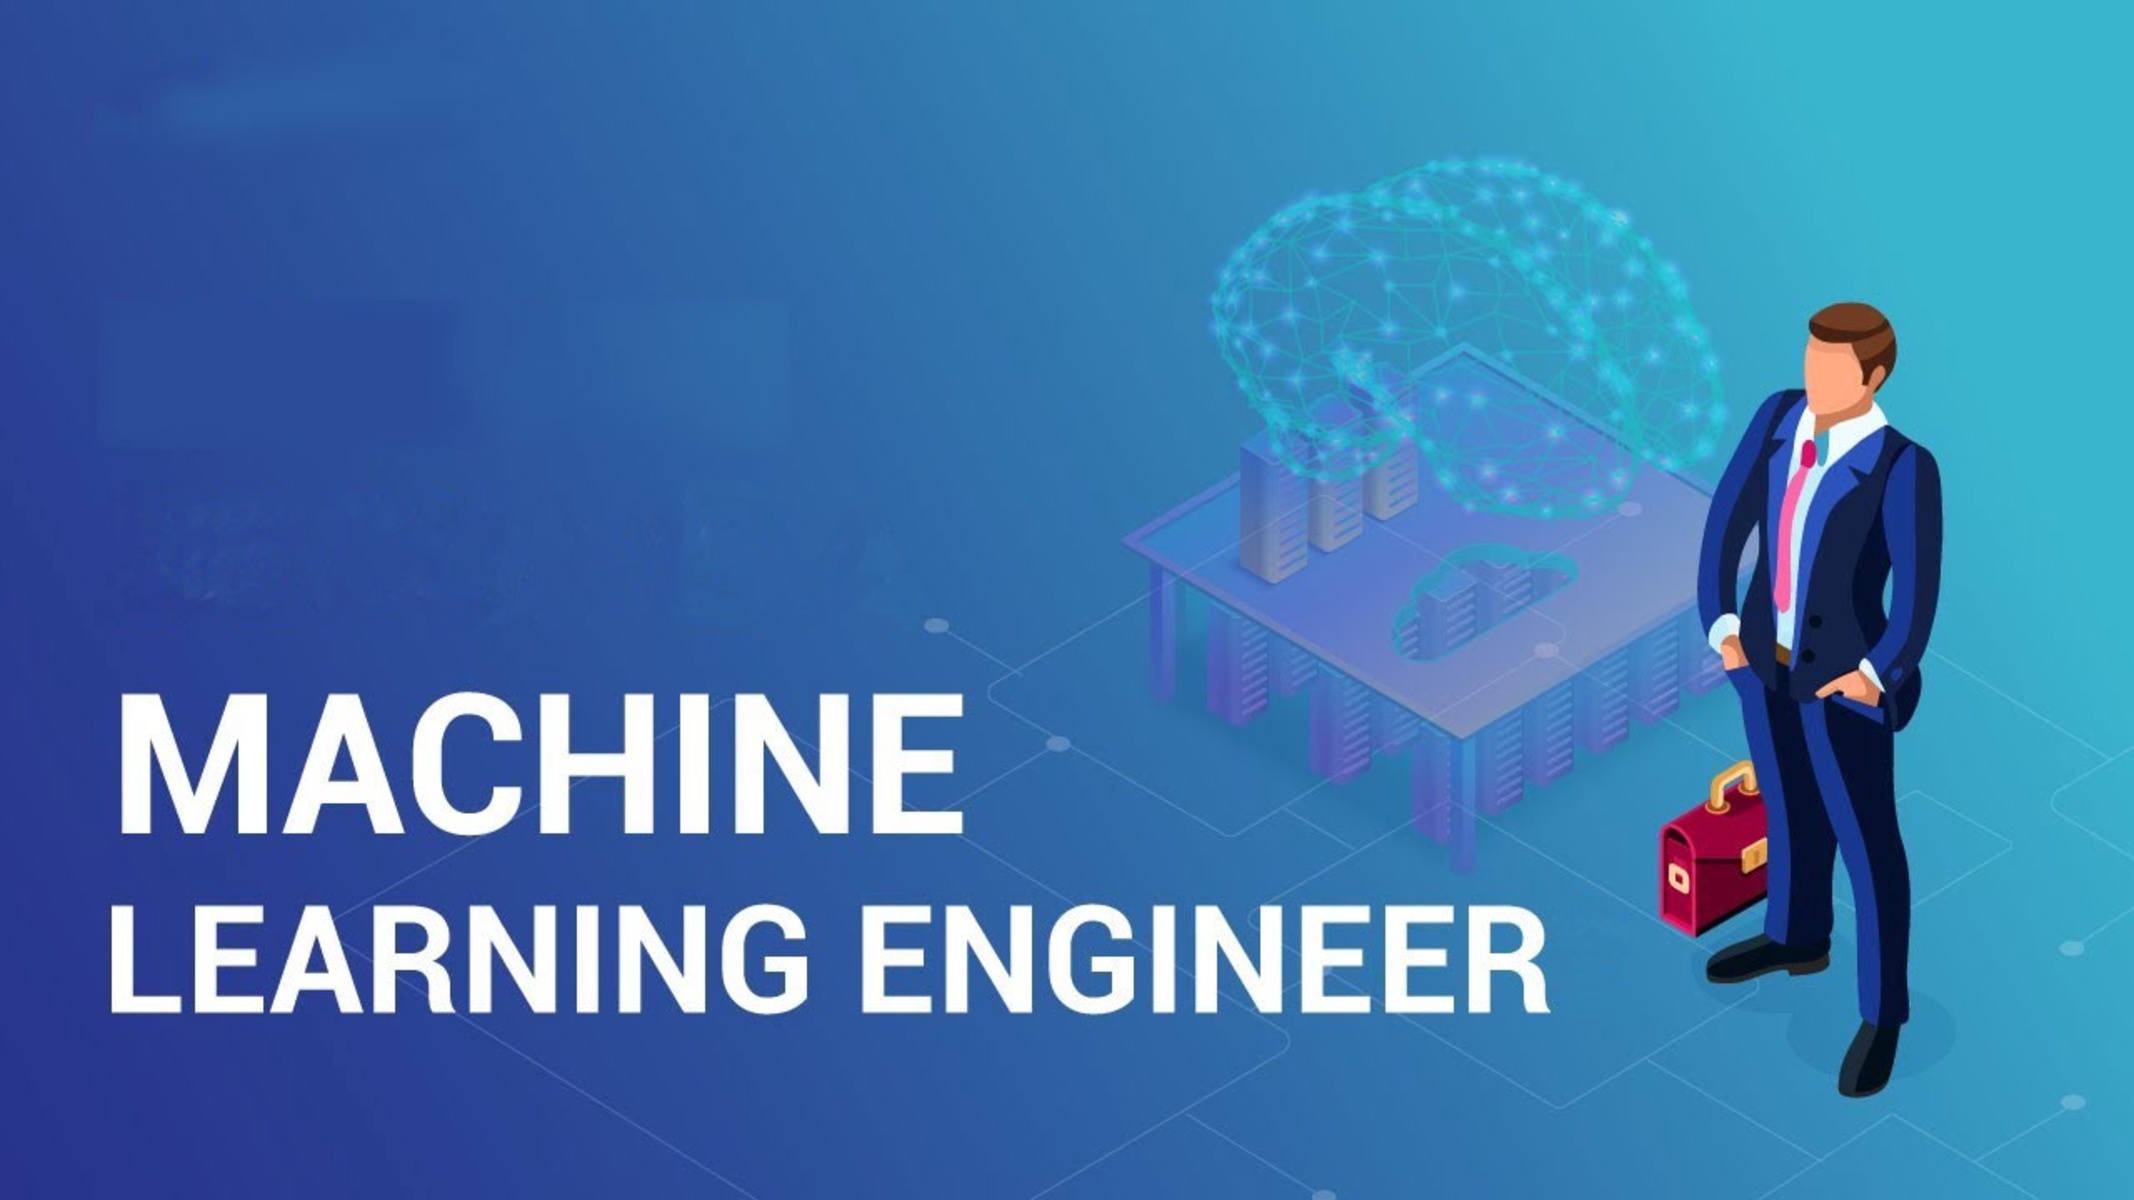 How Do I Become A Machine Learning Engineer